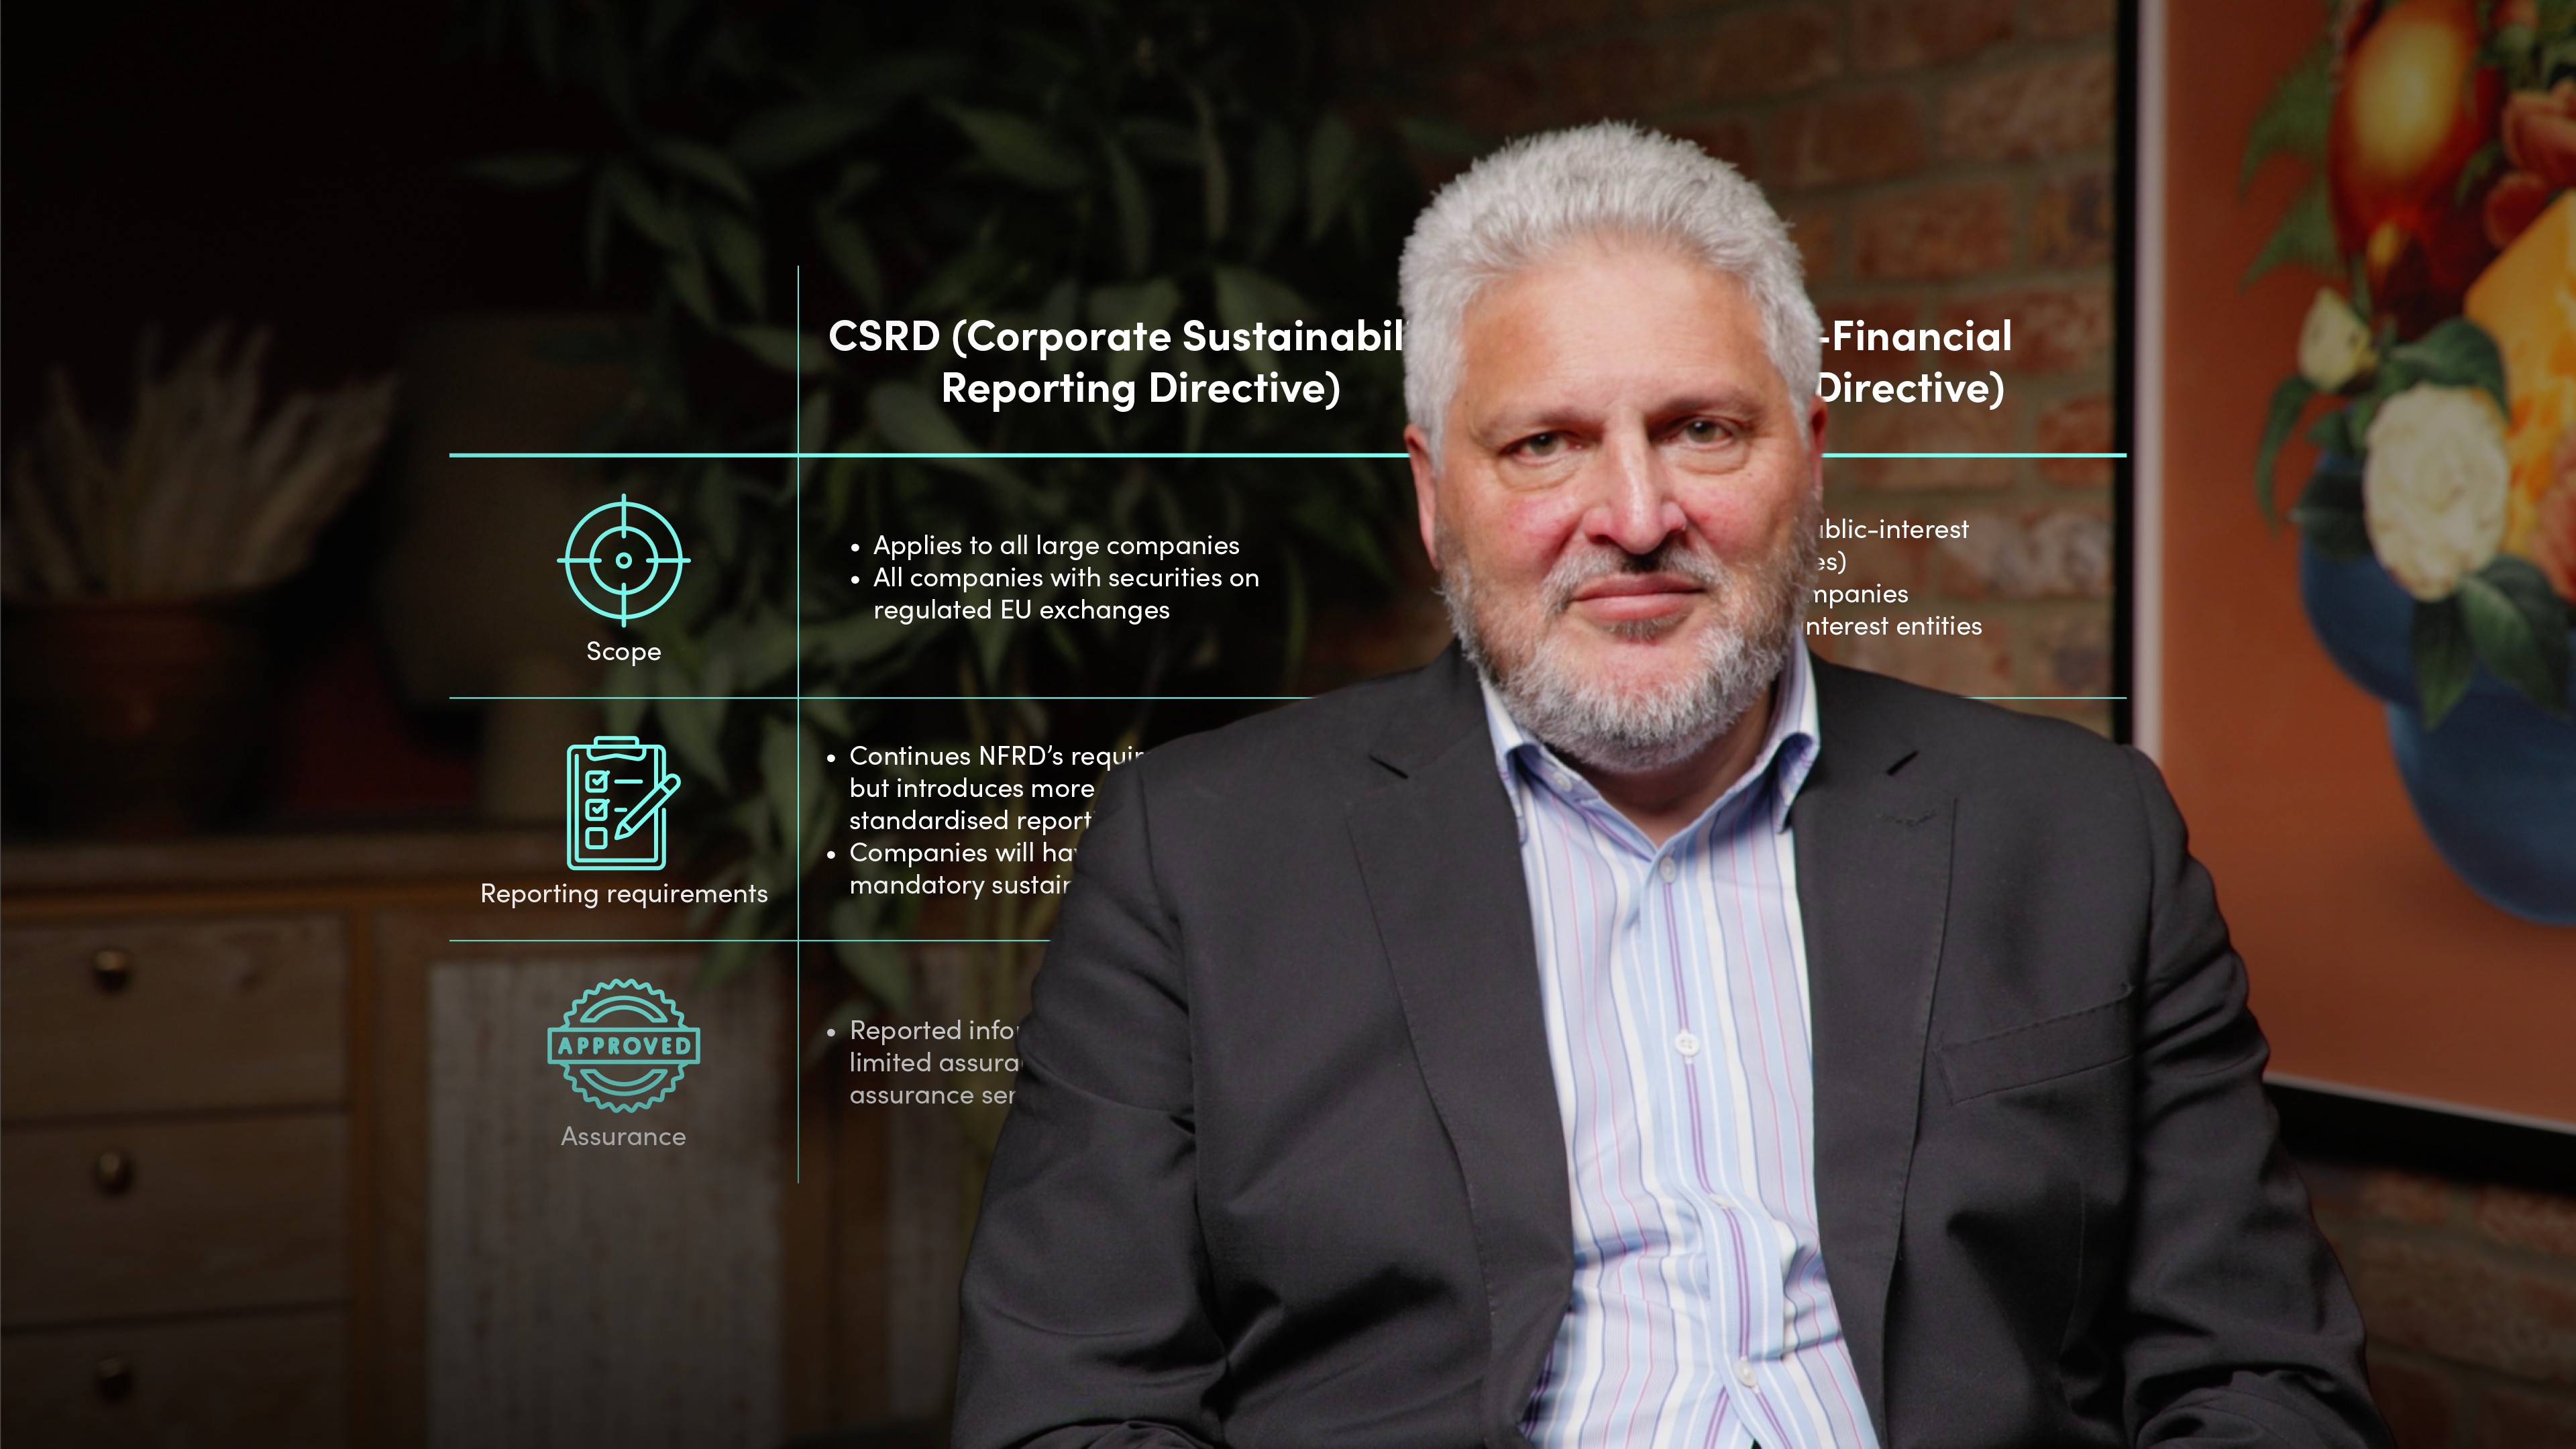 The Corporate Sustainability Reporting Directive (CSRD)